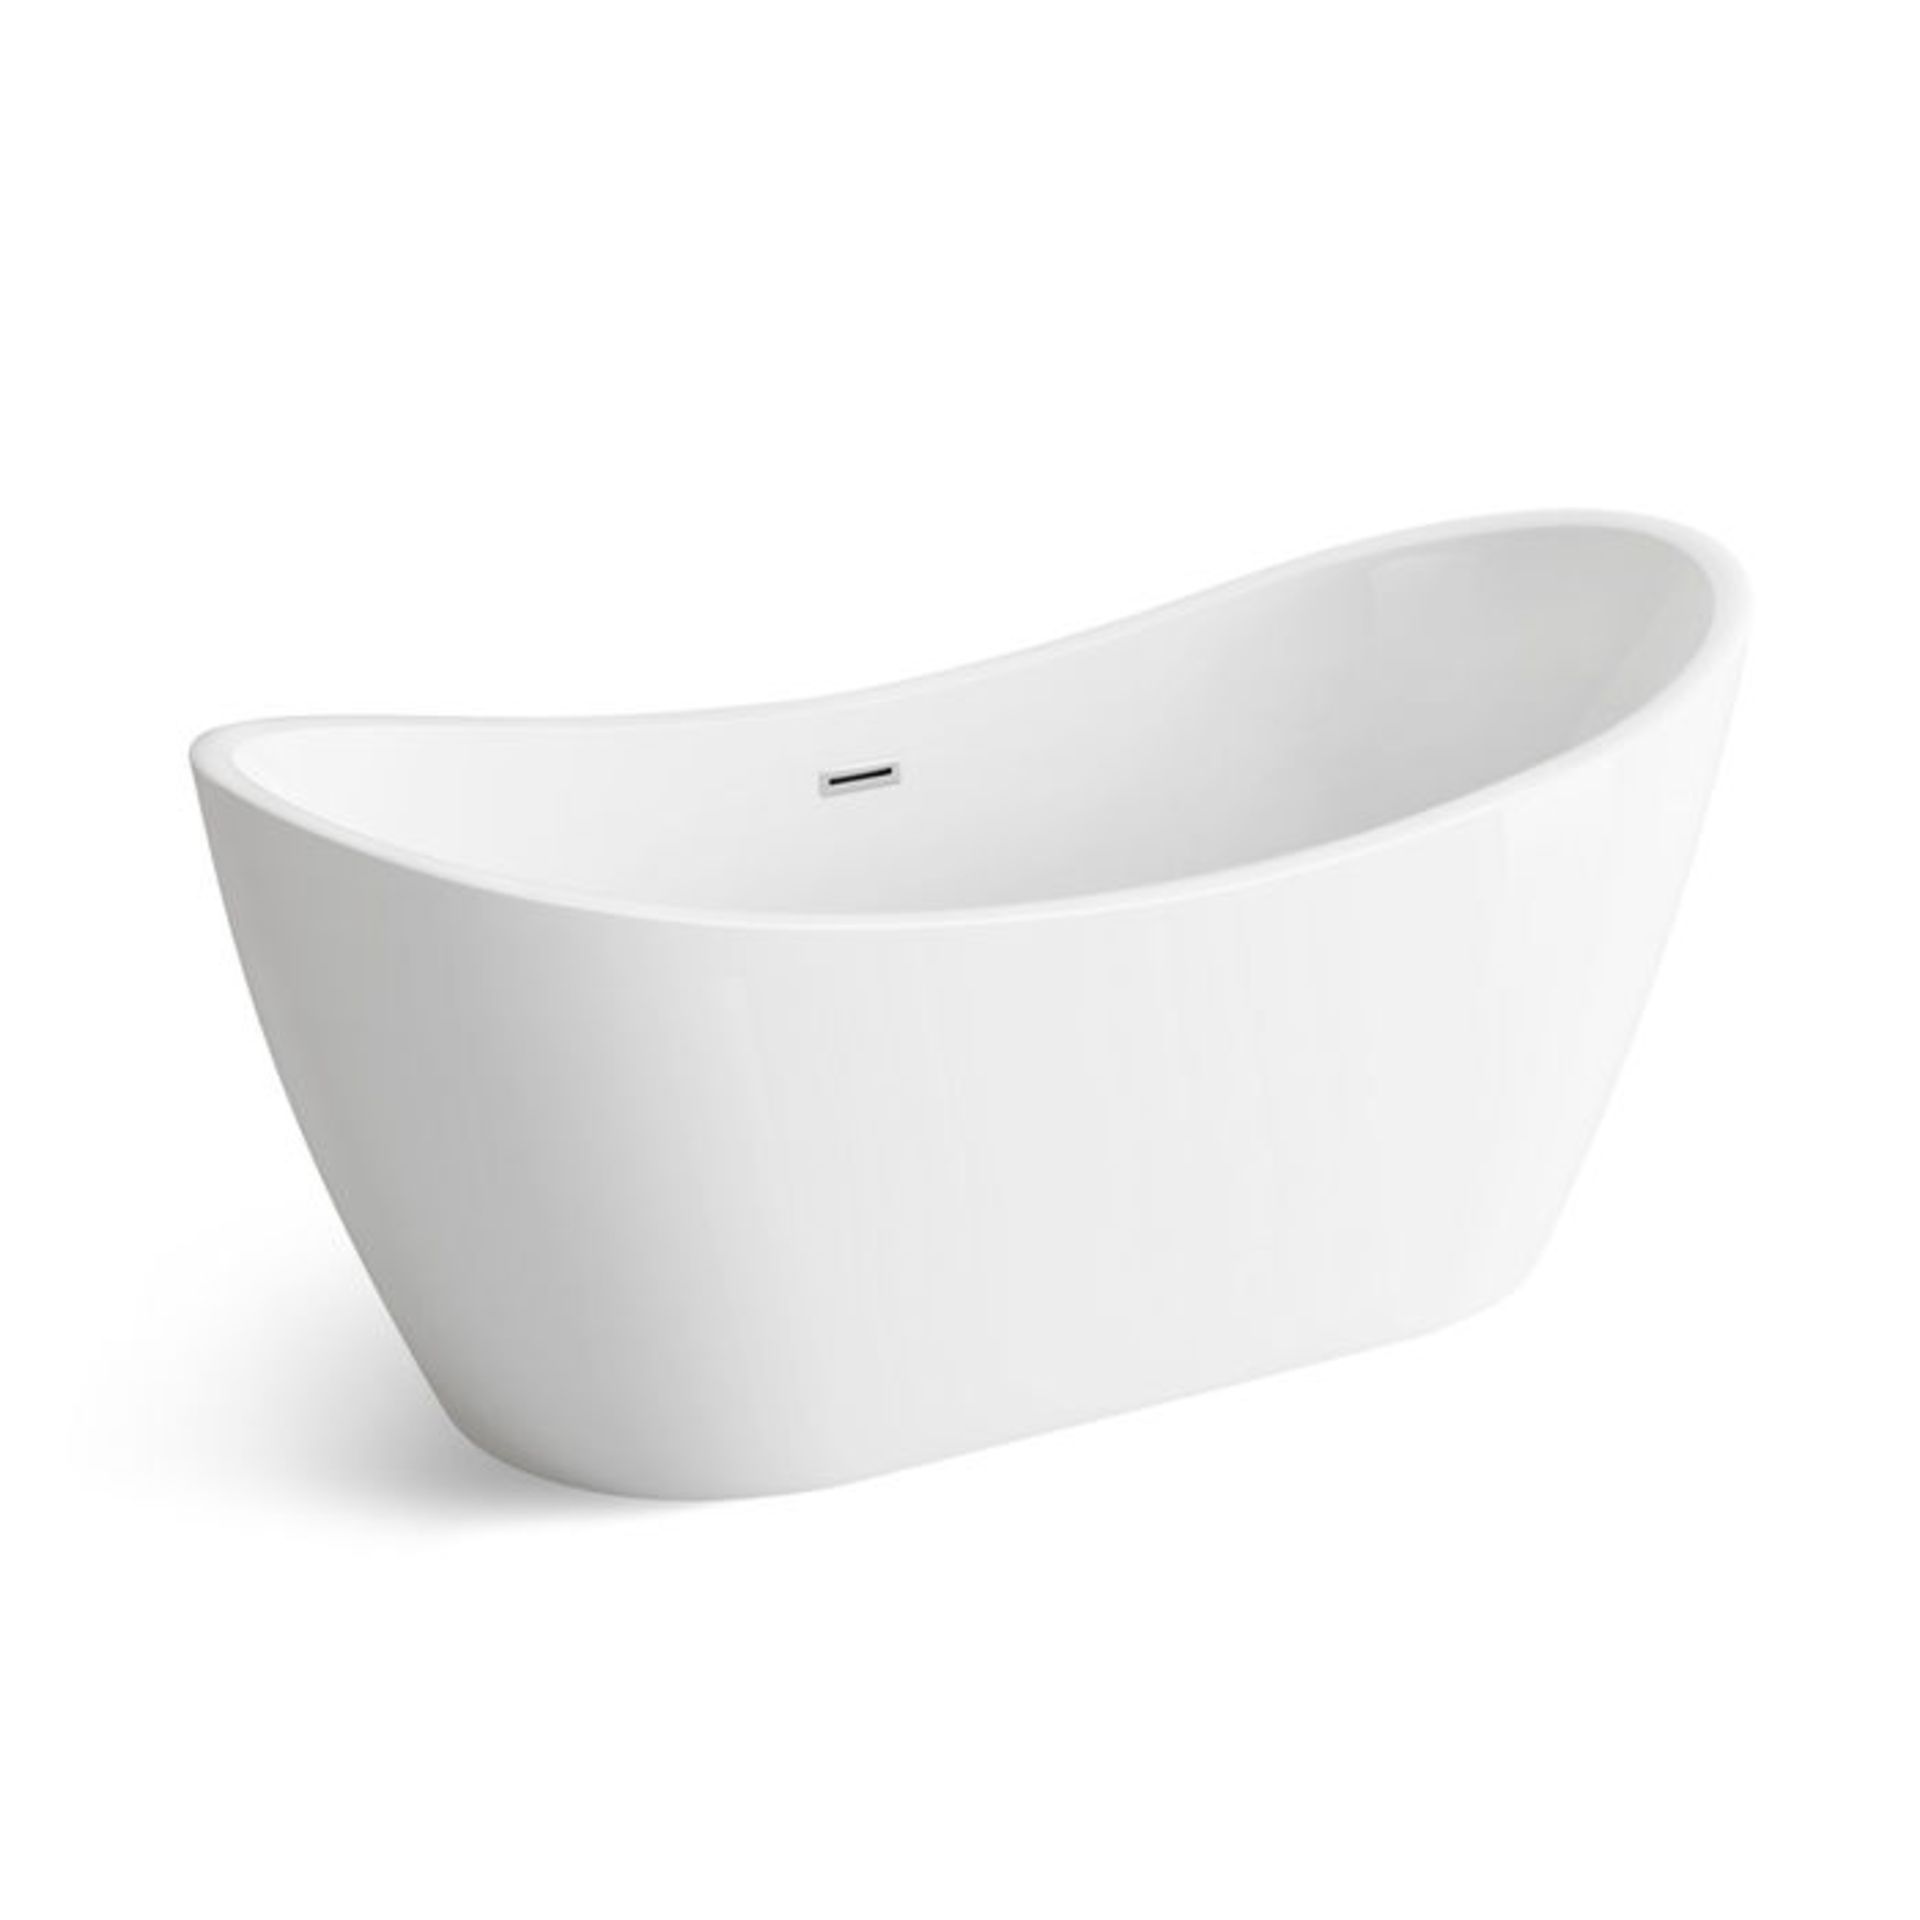 New (D11) 1700x780mm. Caitlyn Freestanding Bath. Visually Simplistic To Suit Any Bathroom Inte... - Image 3 of 3